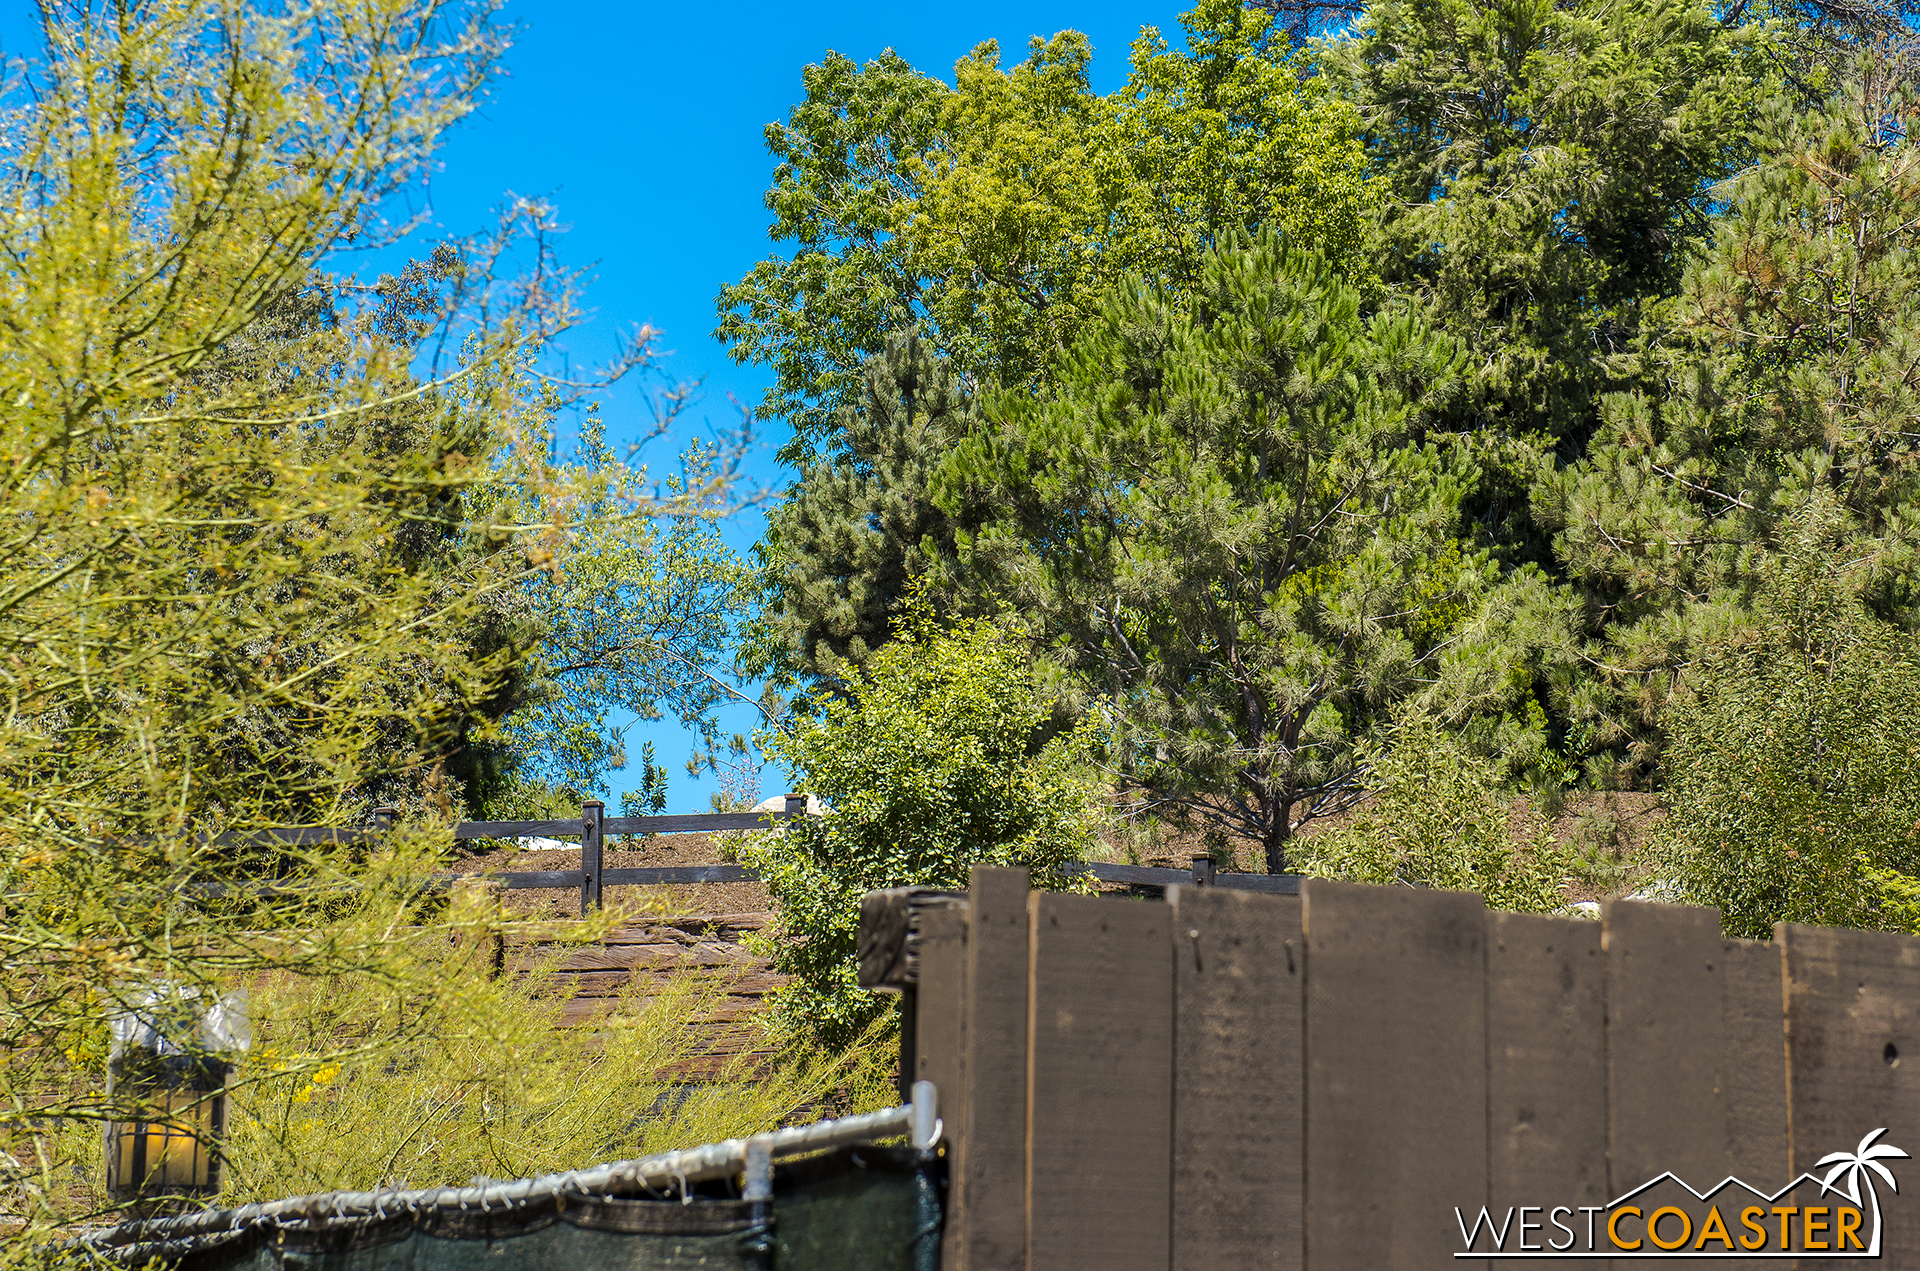  Up over that berm, the Disneyland Railroad will turn left toward Fantasyland Theater and Toontown. 